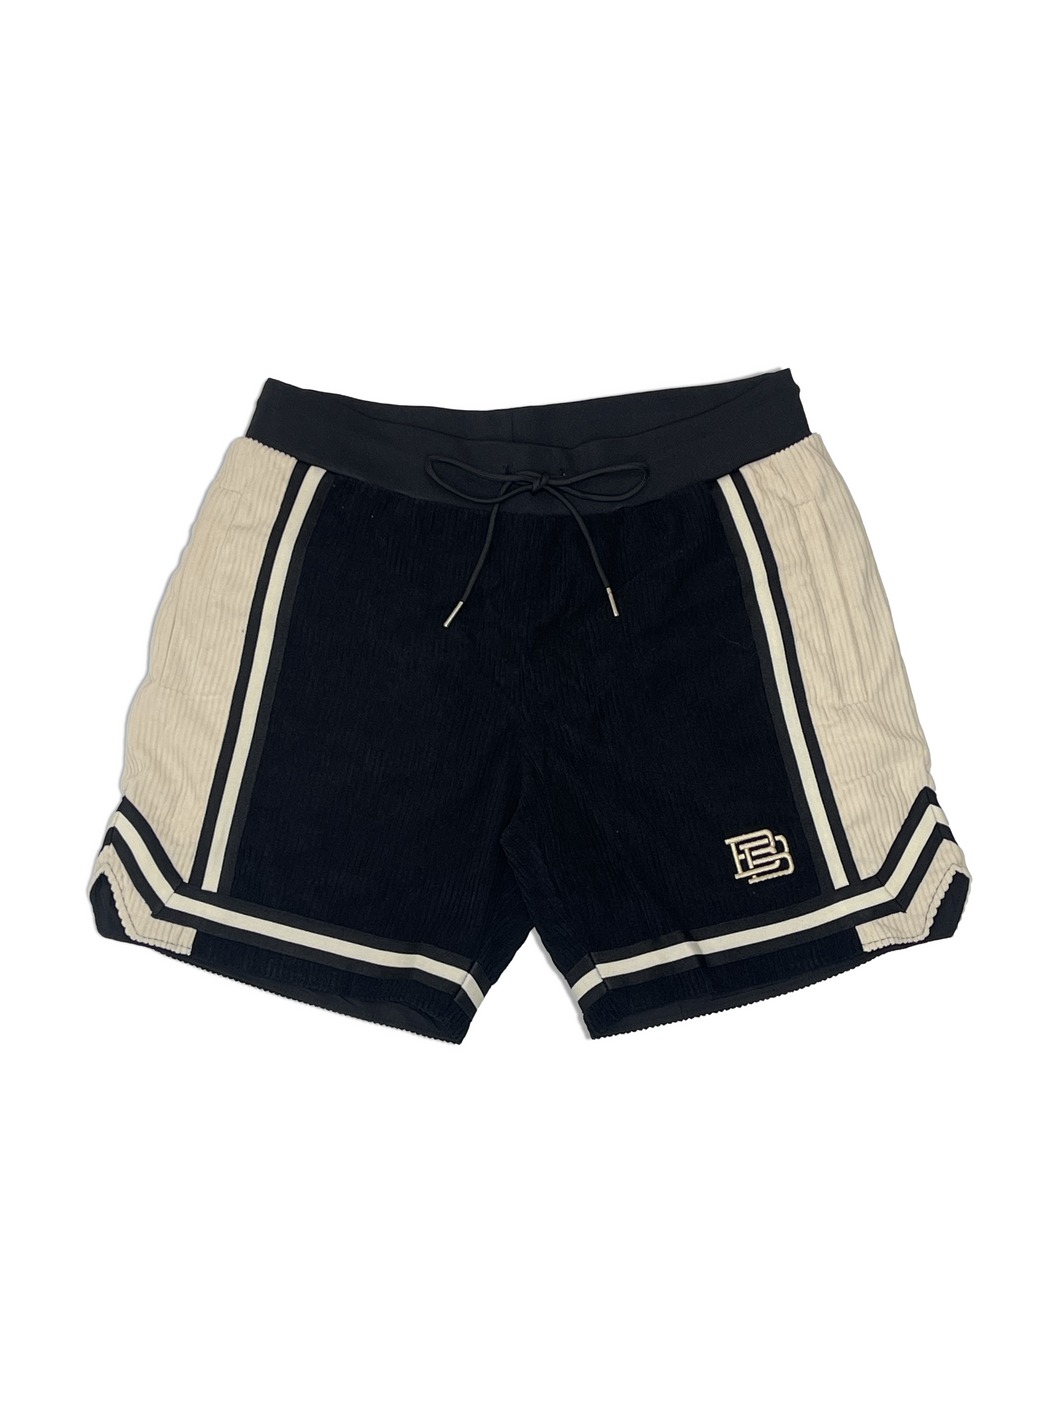 Corduroy Shorts “Cookies and Cream”